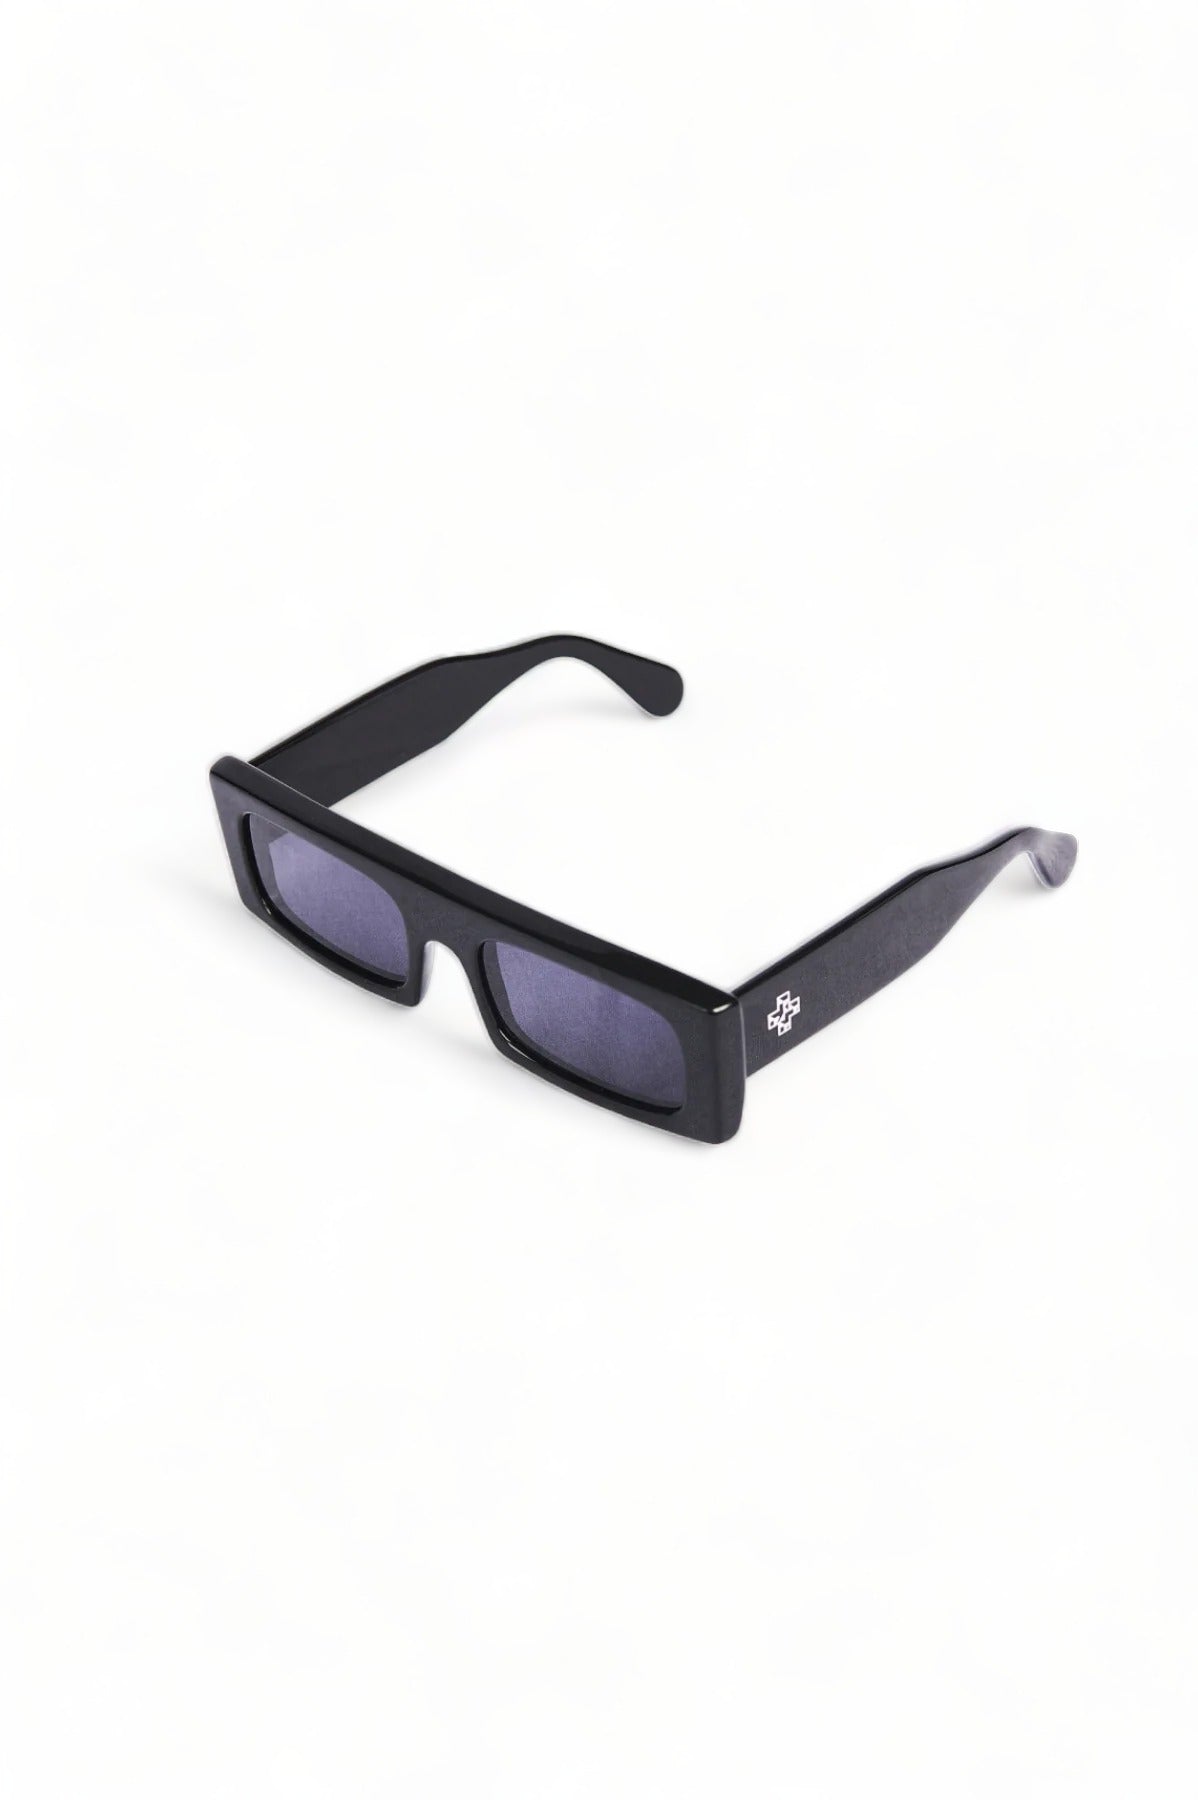 Discover more than 73 0 power sunglasses best